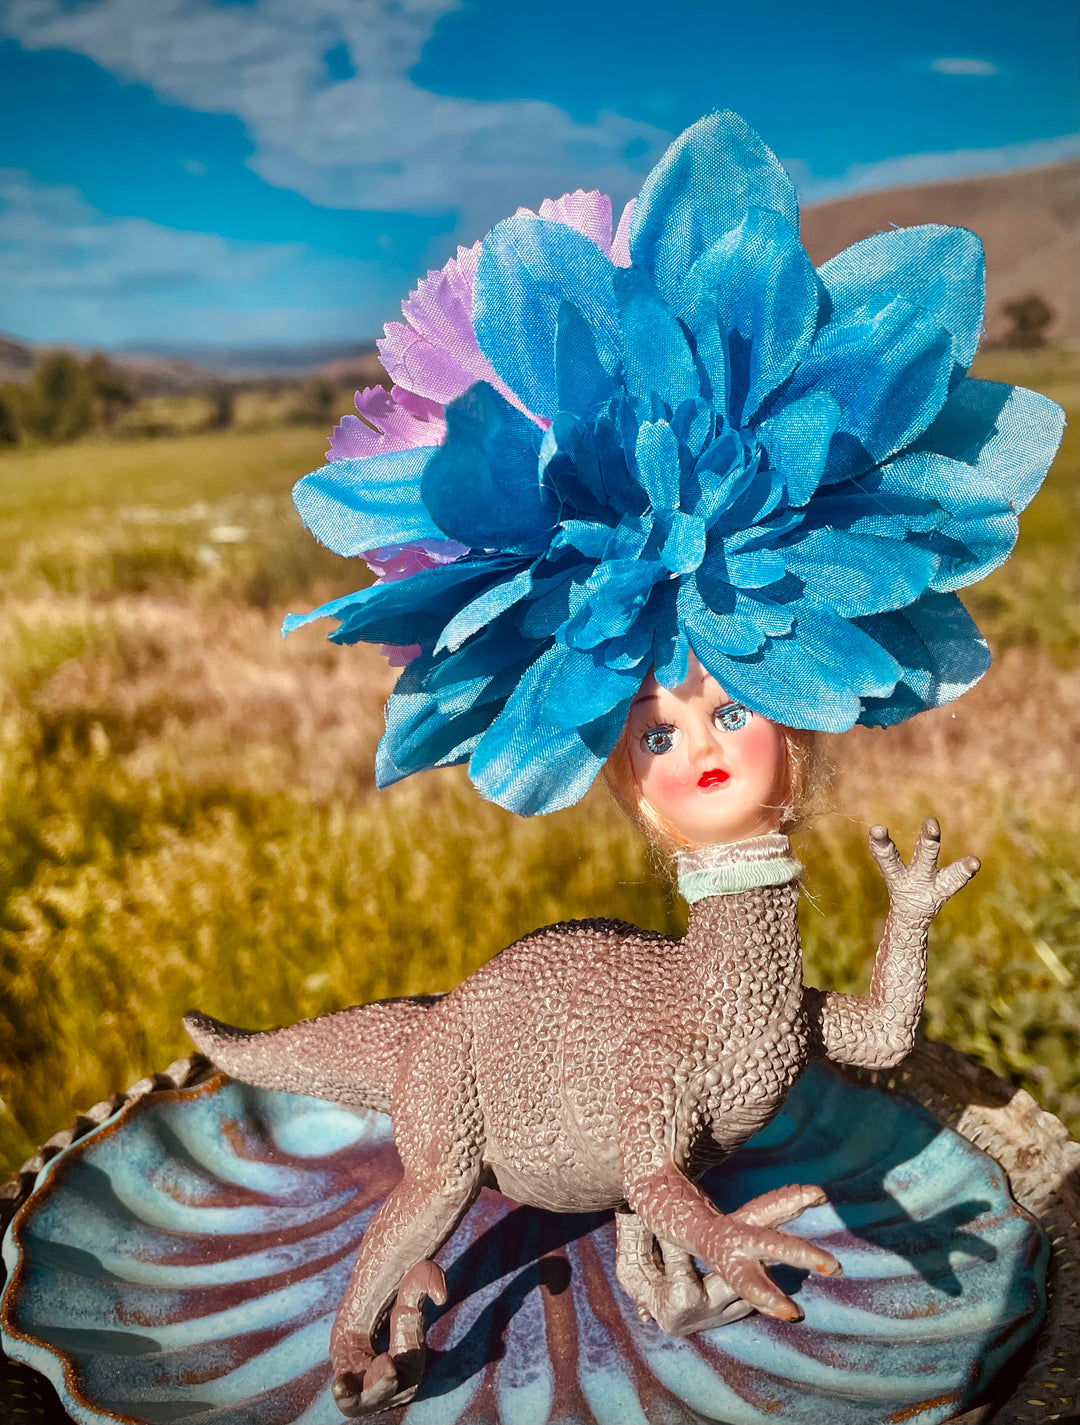 Vintage toy dinosaur with vintage doll head and flower headdress. 5" tall x 5" long x 3" wide.